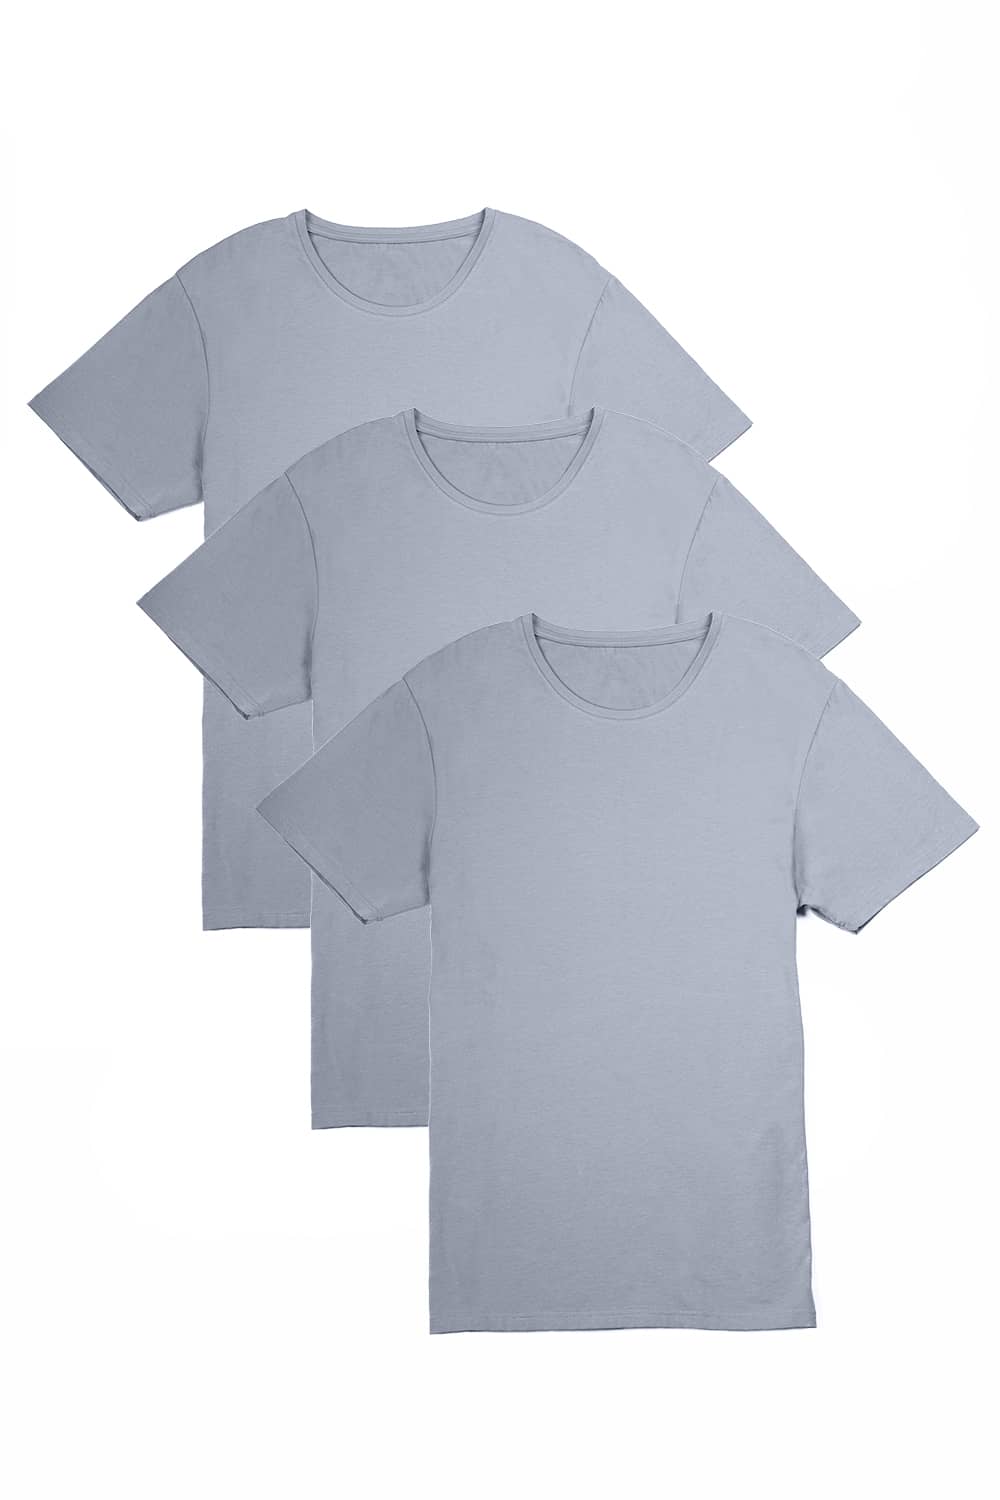 Men's Classic Fit Soft Stretch Crew Neck Undershirt Mens>Casual>Tops Fishers Finery Sky Gray Small 3 Pack